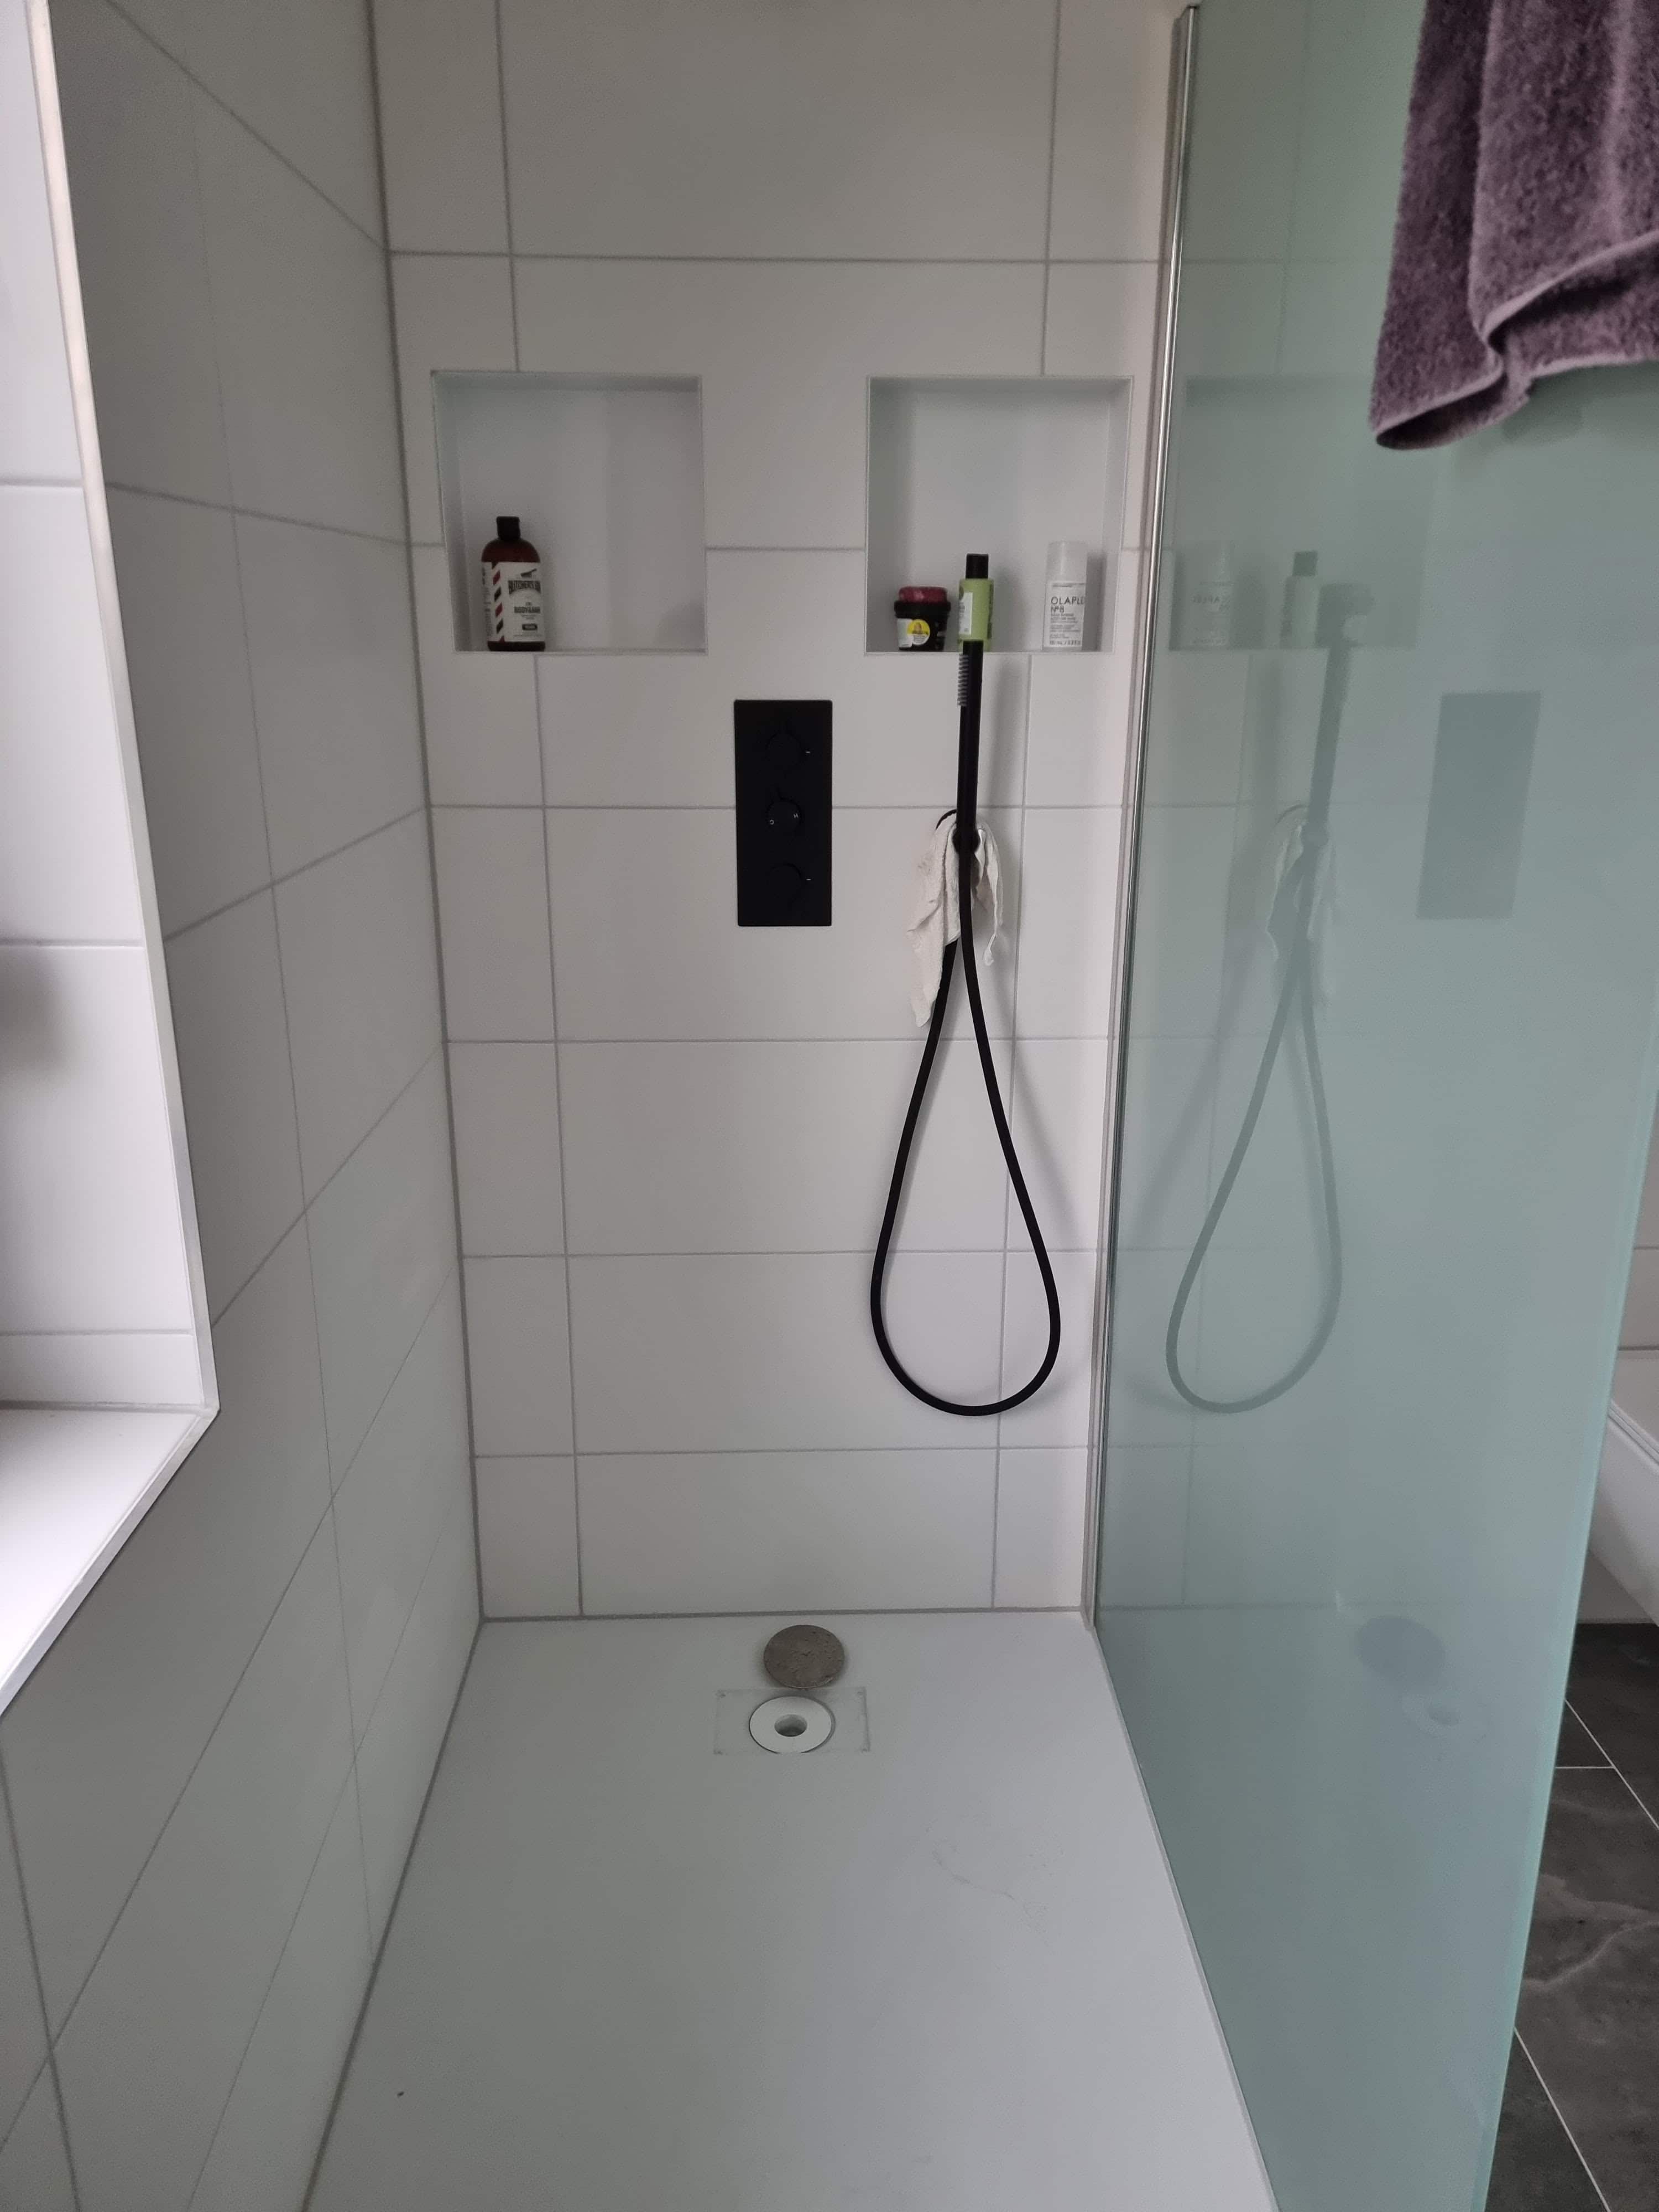 The bathroom was completely renovated by Guido Breitbach. The picture shows a bathroom with a shower and white tiles. Two squares have been incorporated into the wall for shower gel and other bathroom utensils.